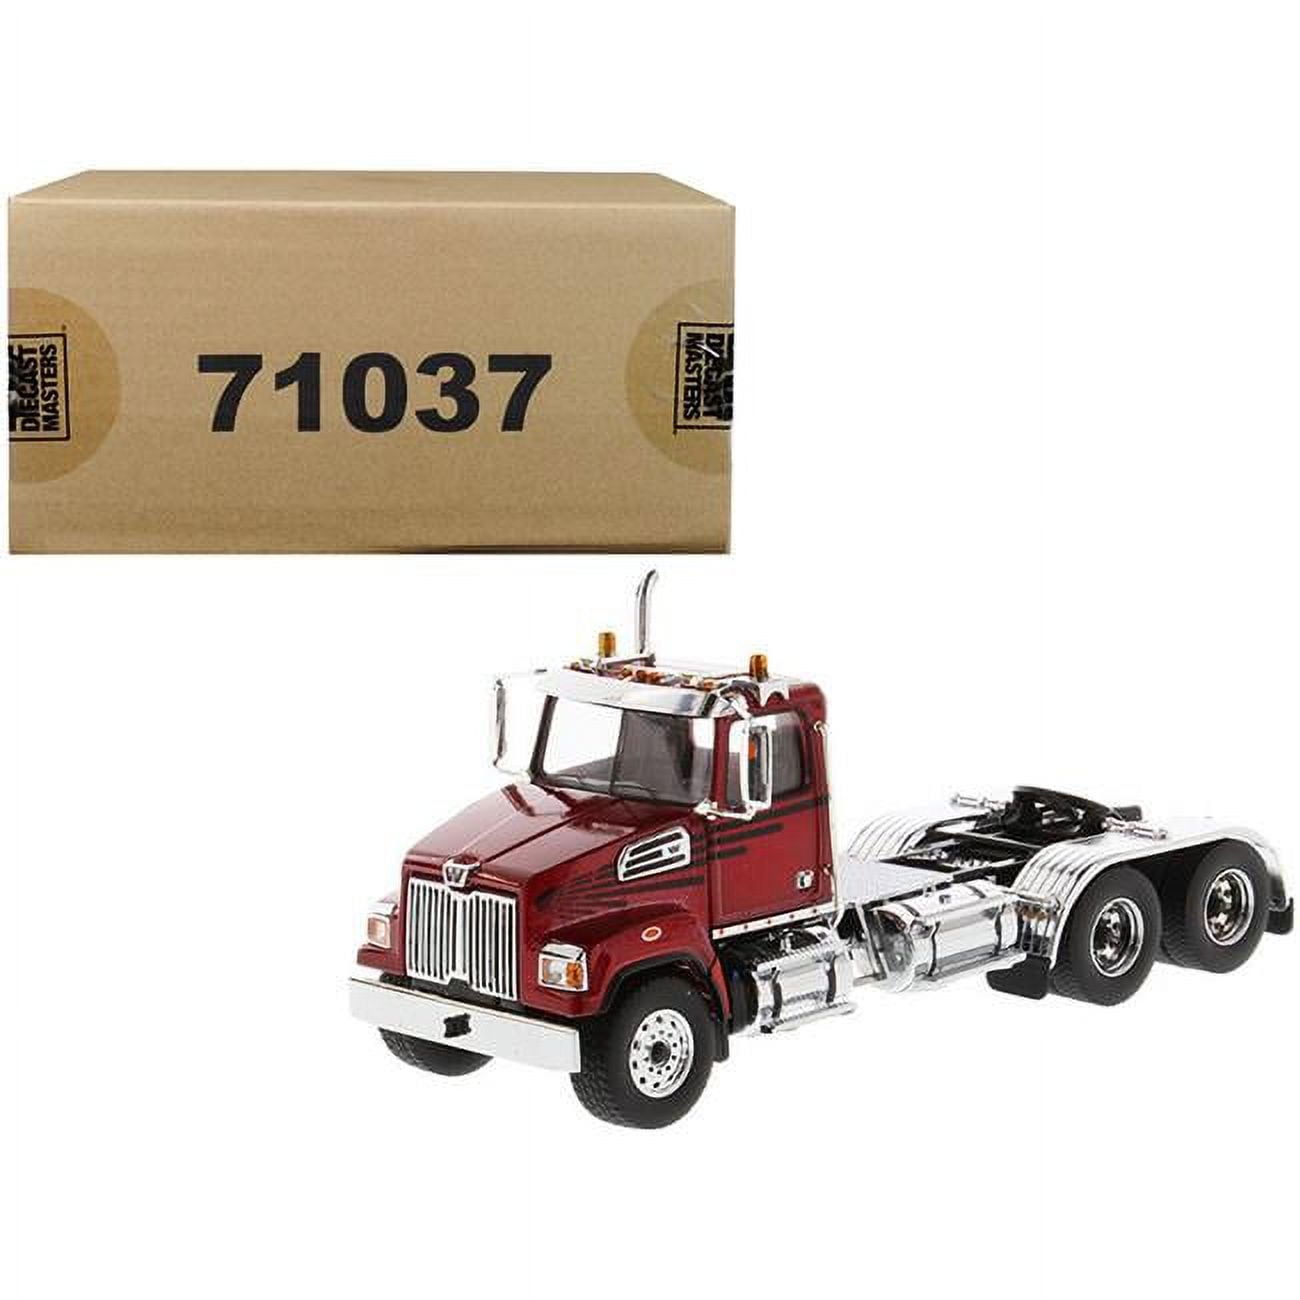 71037 1 By 50 Diecast Scale Day Cab Tractor For Western Star 4700 Sf Tandem Model, Metallic Red & Silver